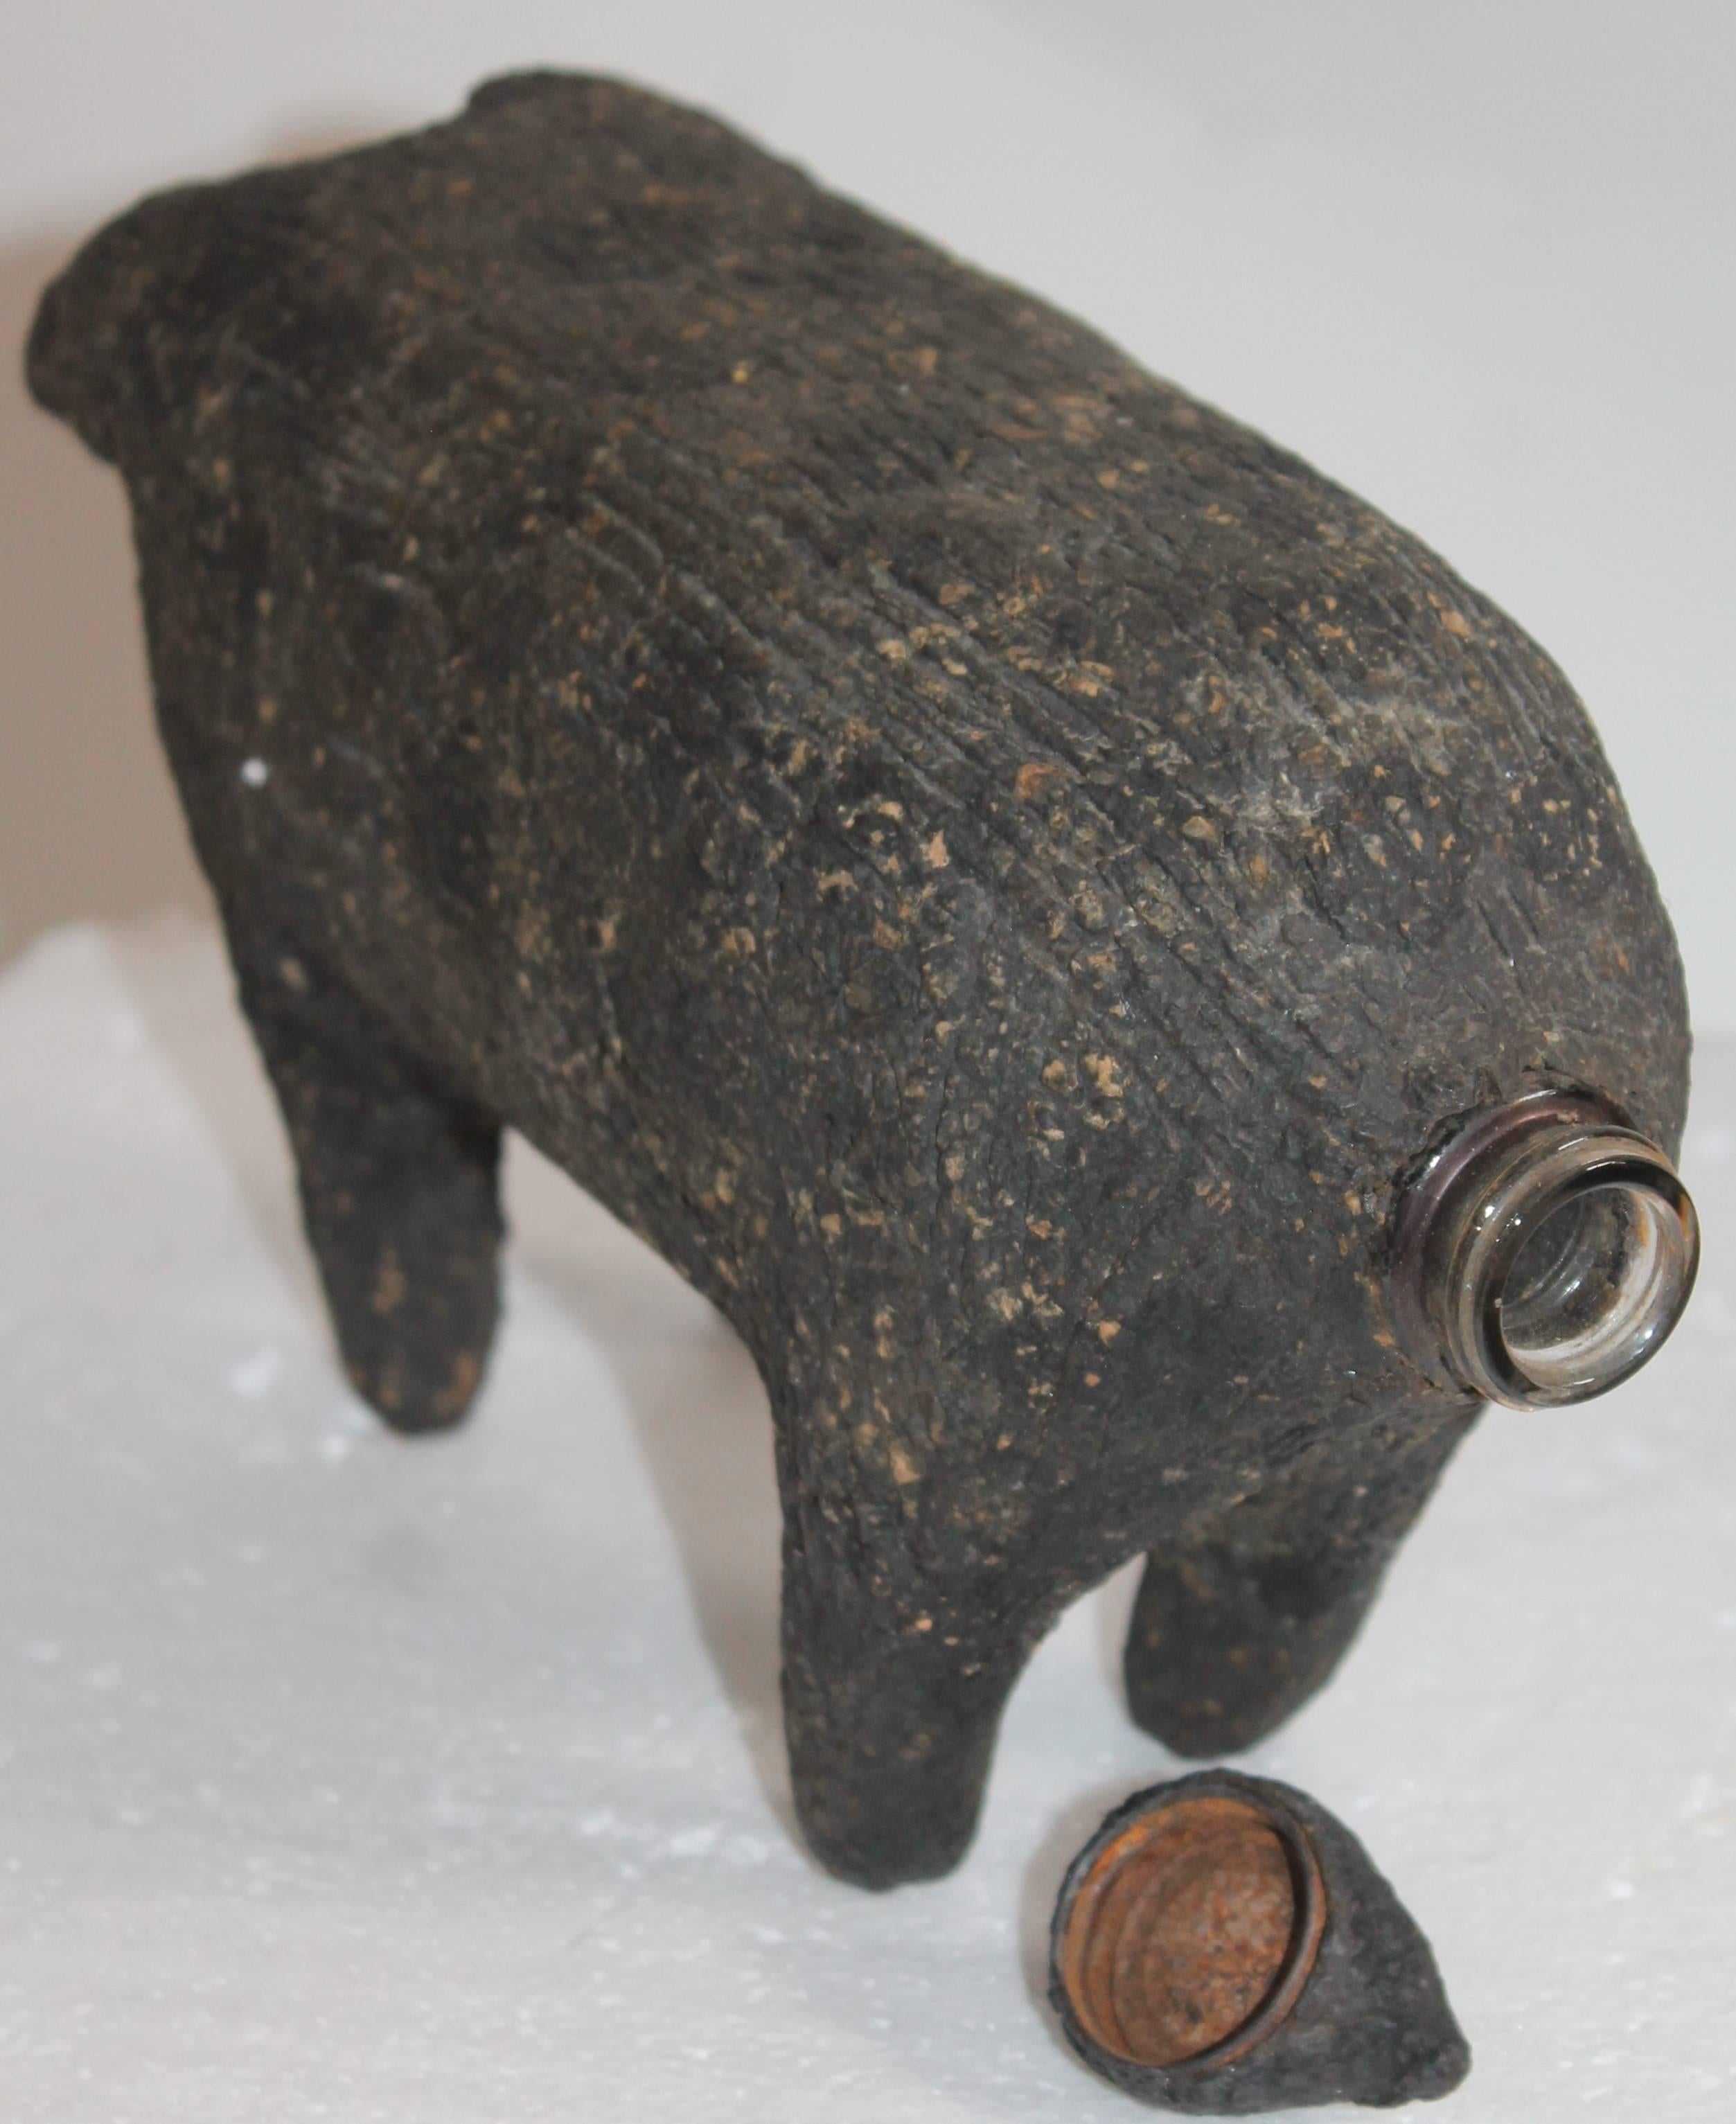 19th century original black painted wood covered handcrafted bottle with a shot glass. This pig is so folky and most unusual. The condition is very good.